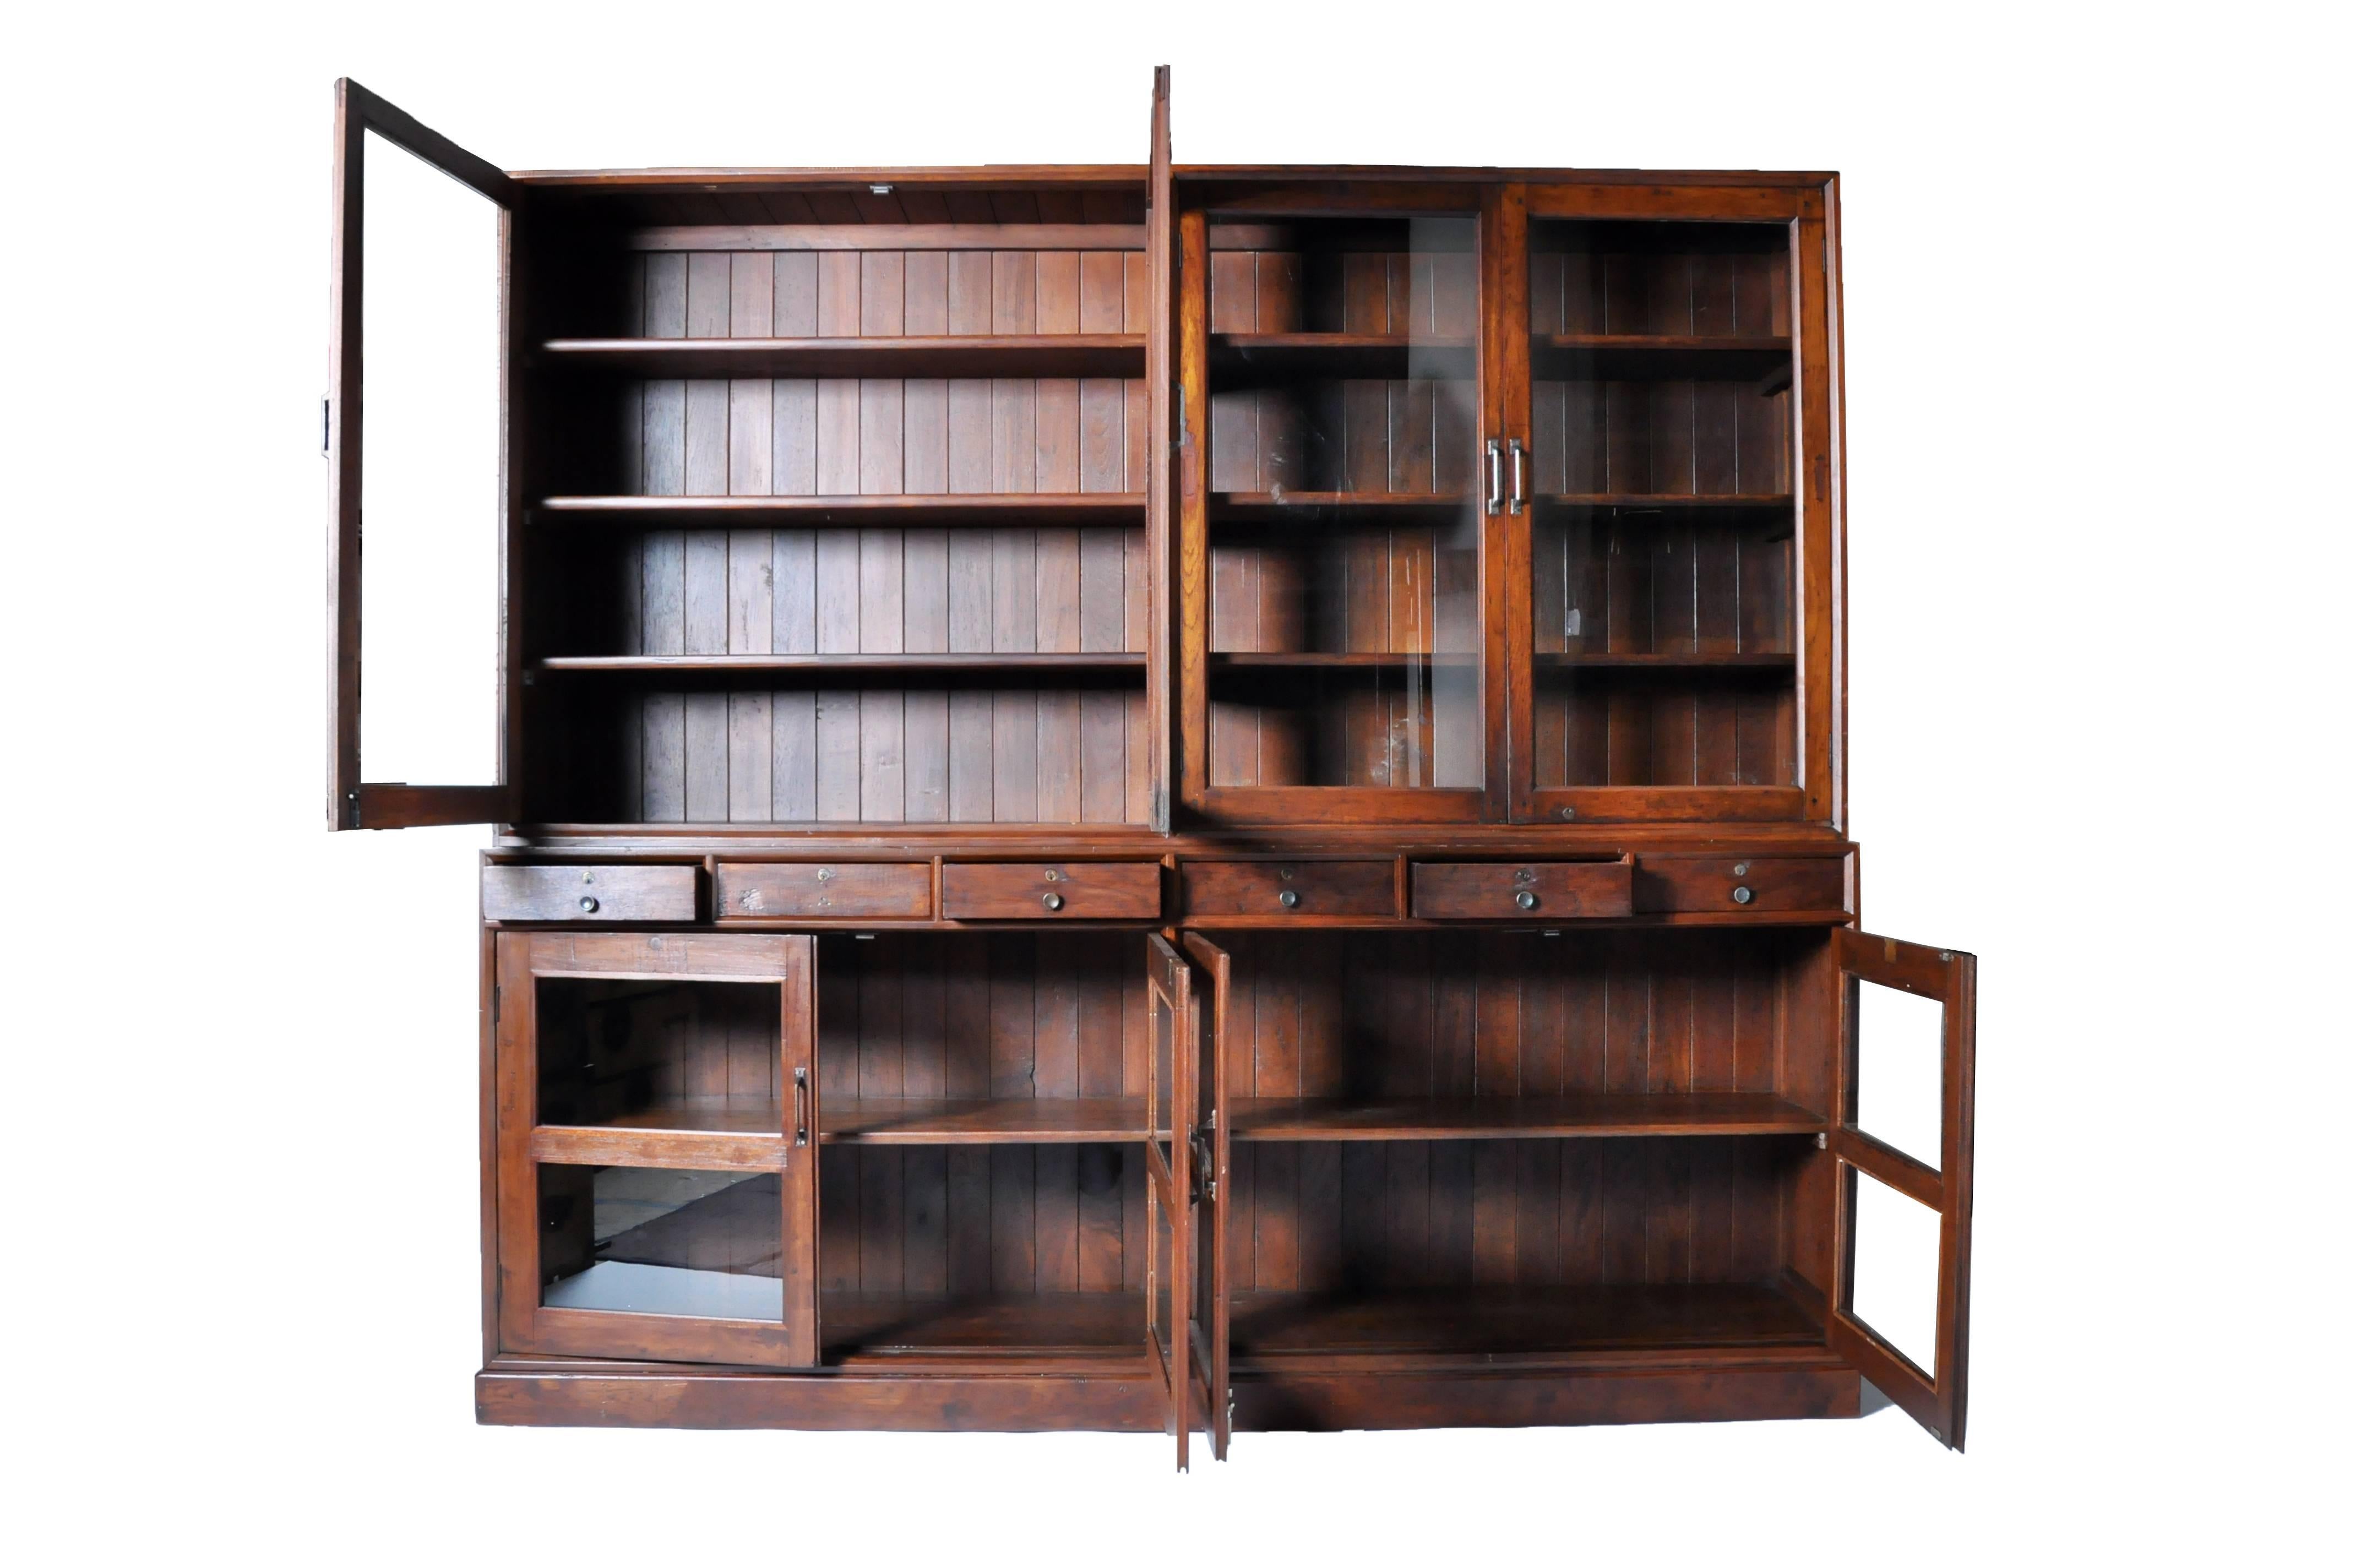 This impressive British Colonial cabinet comes in two parts; both the top and bottom display case features two pairs of glass paned doors that open to compartments lined with shelves. The top section boasts ample storage space in the form of two